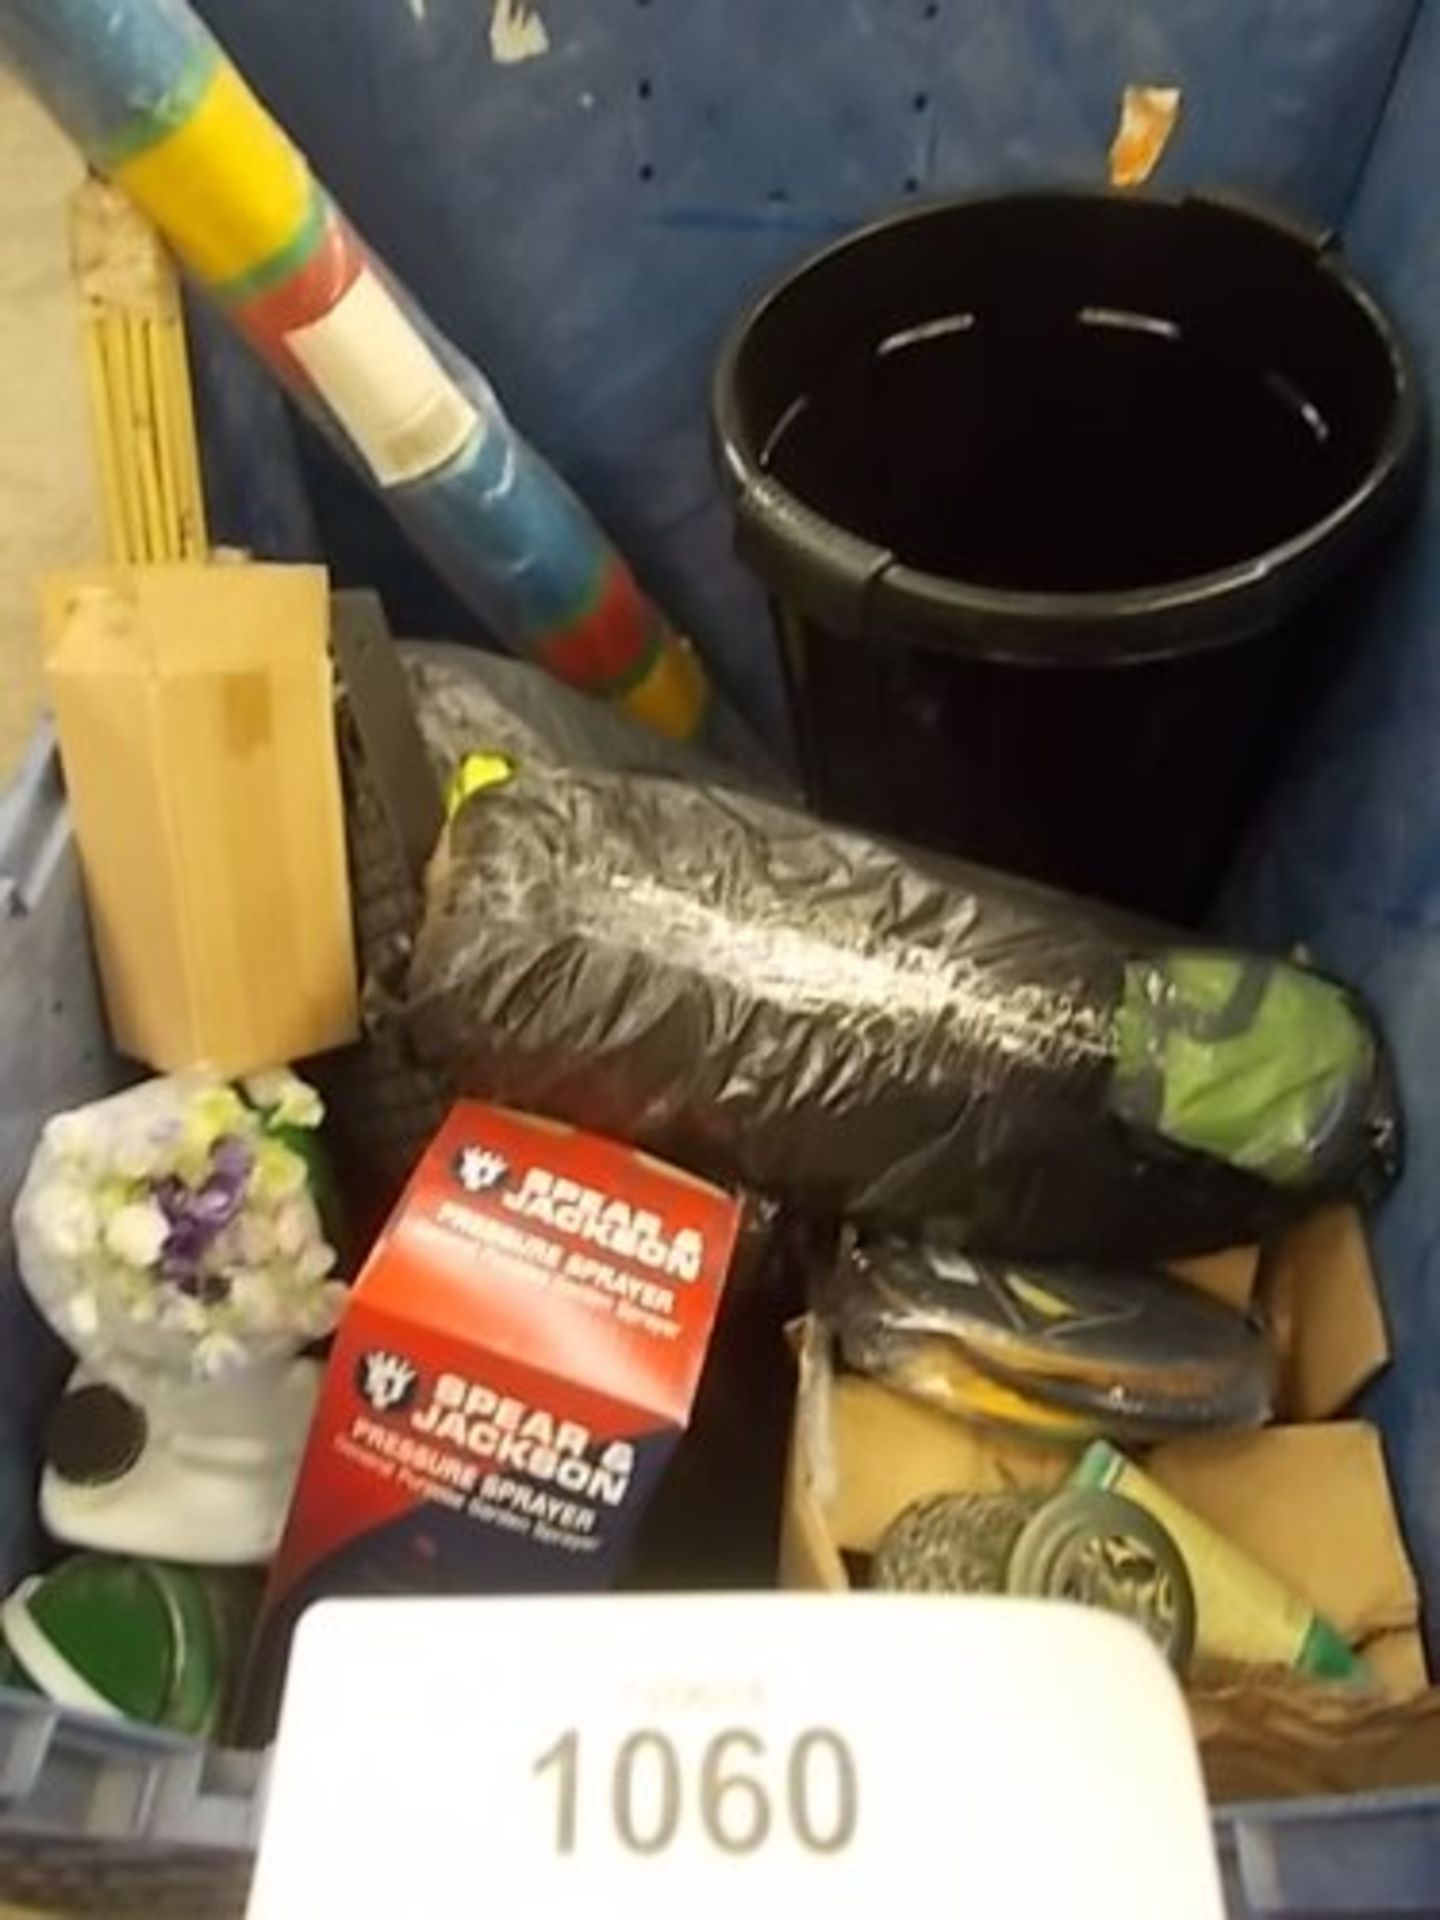 A magnum containing garden products including pressure sprayer, bin, candle holders, windbreak, - Image 3 of 3